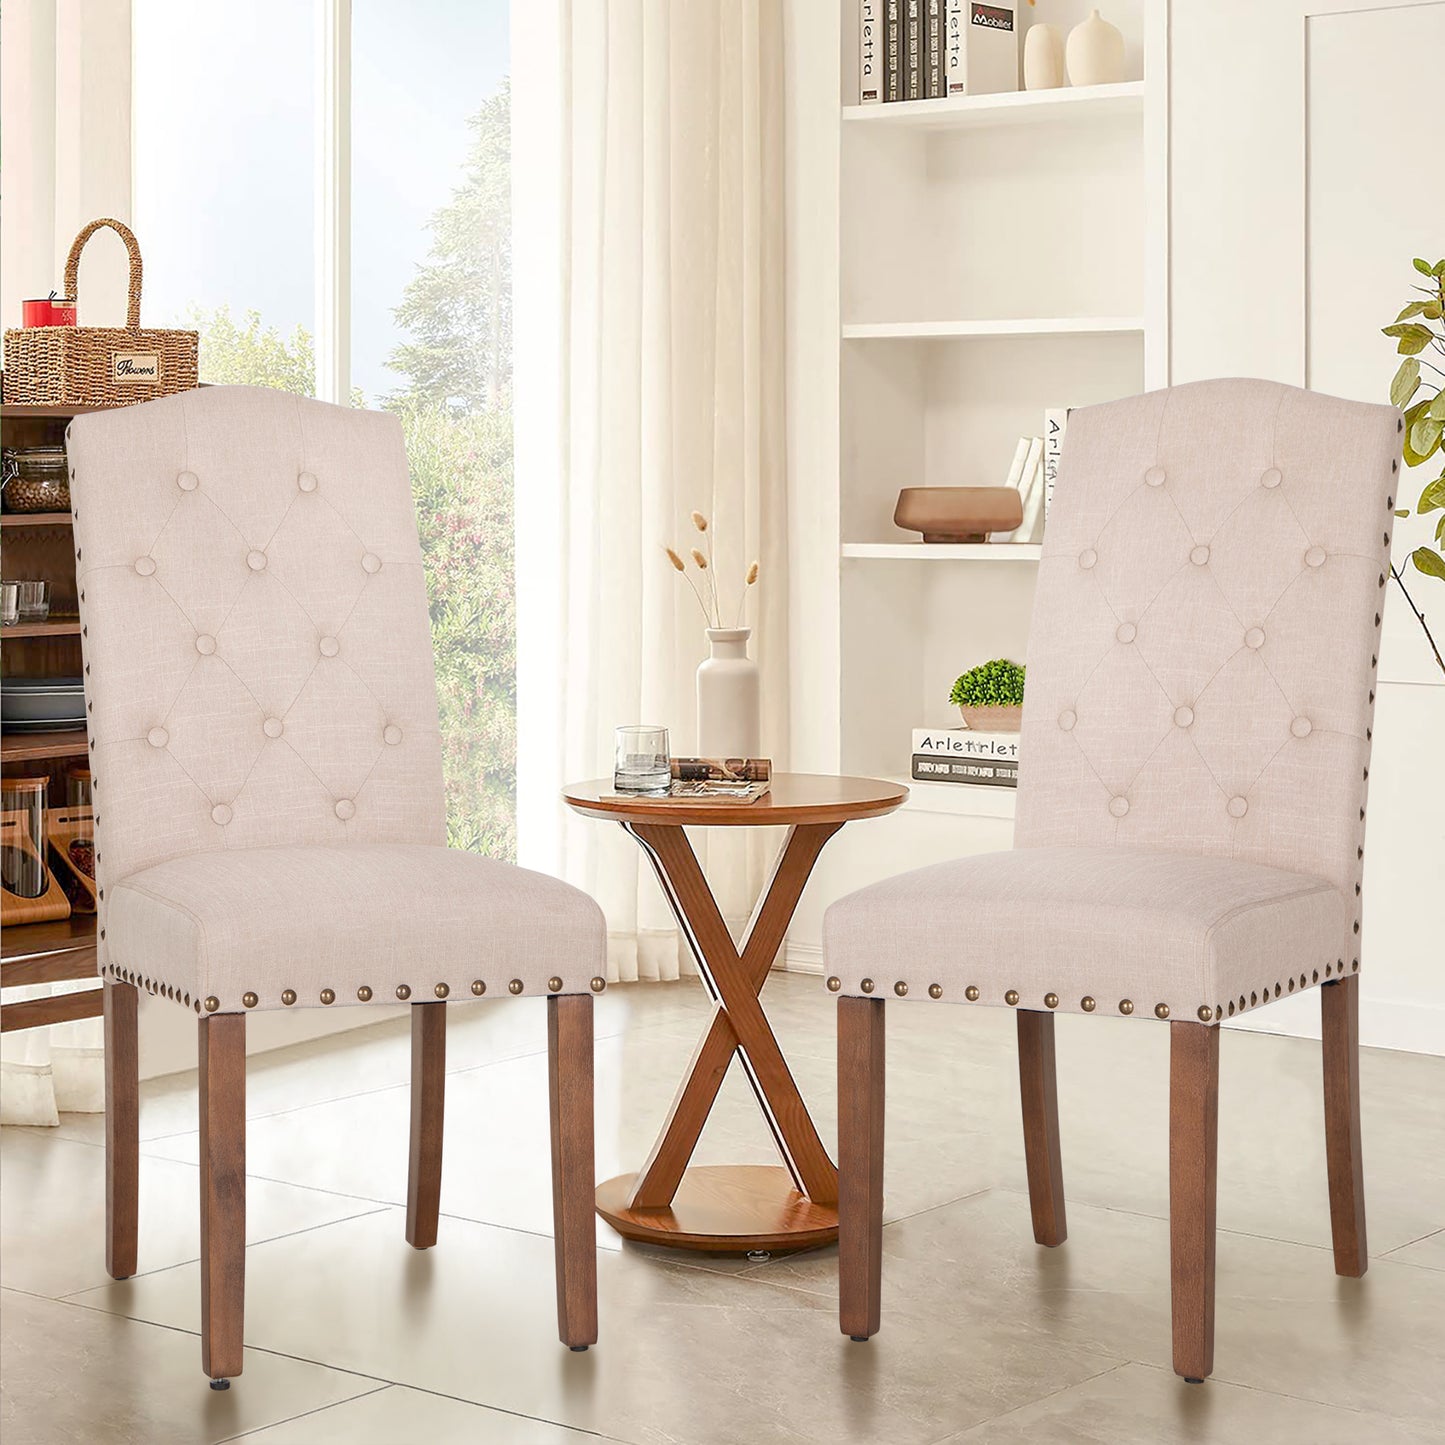 Sophia & William Upholstered Dining Chairs with High Back-Set of 2-White